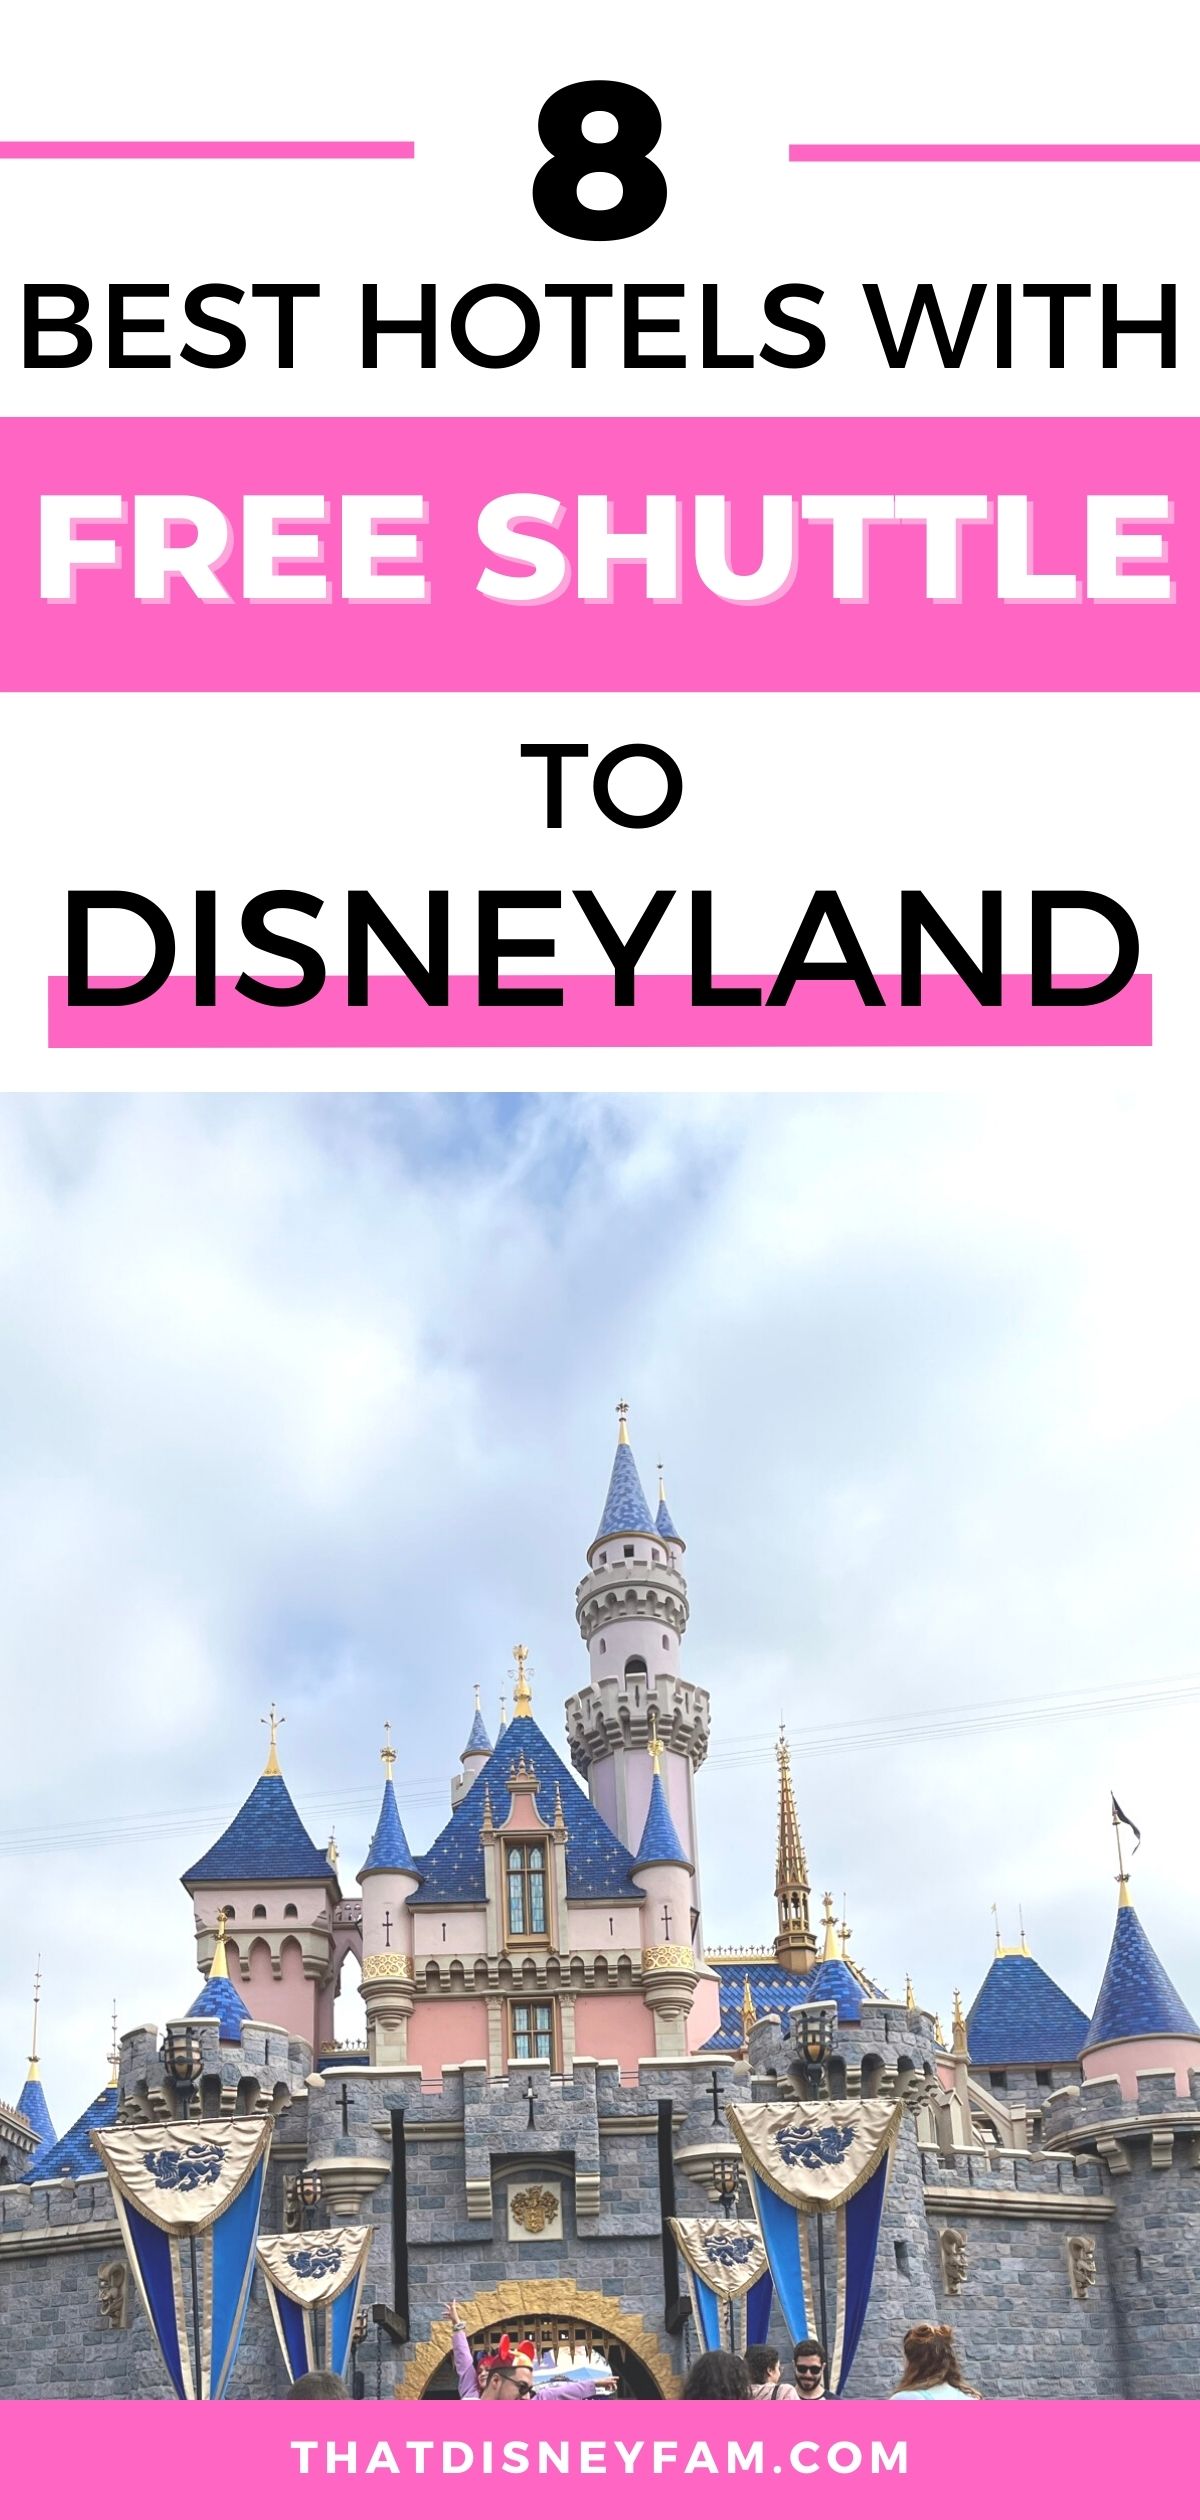 hotels with free shuttle to disneyland